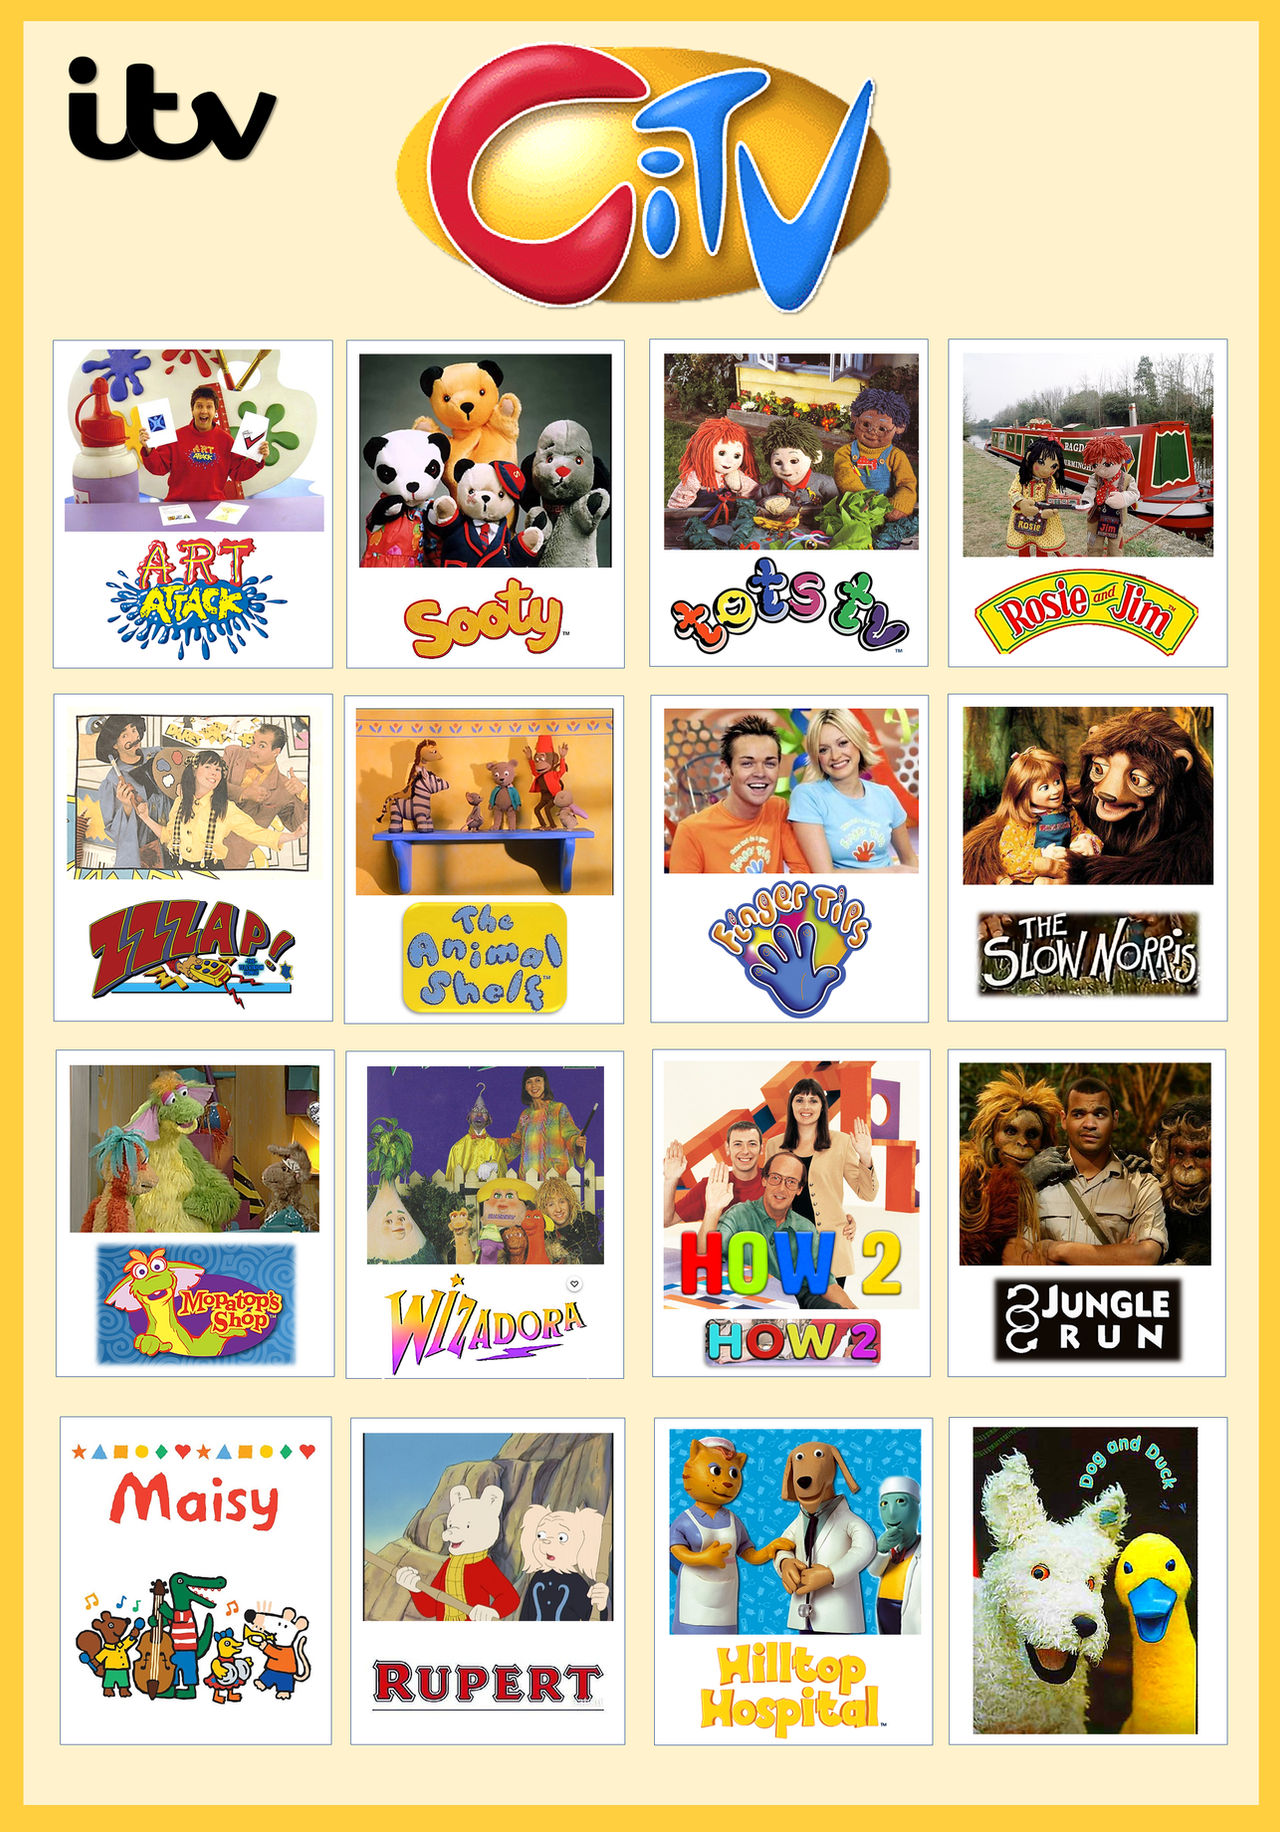 CITV TV Programmes from 1998 - 2003 by gikesmanners1995 on DeviantArt